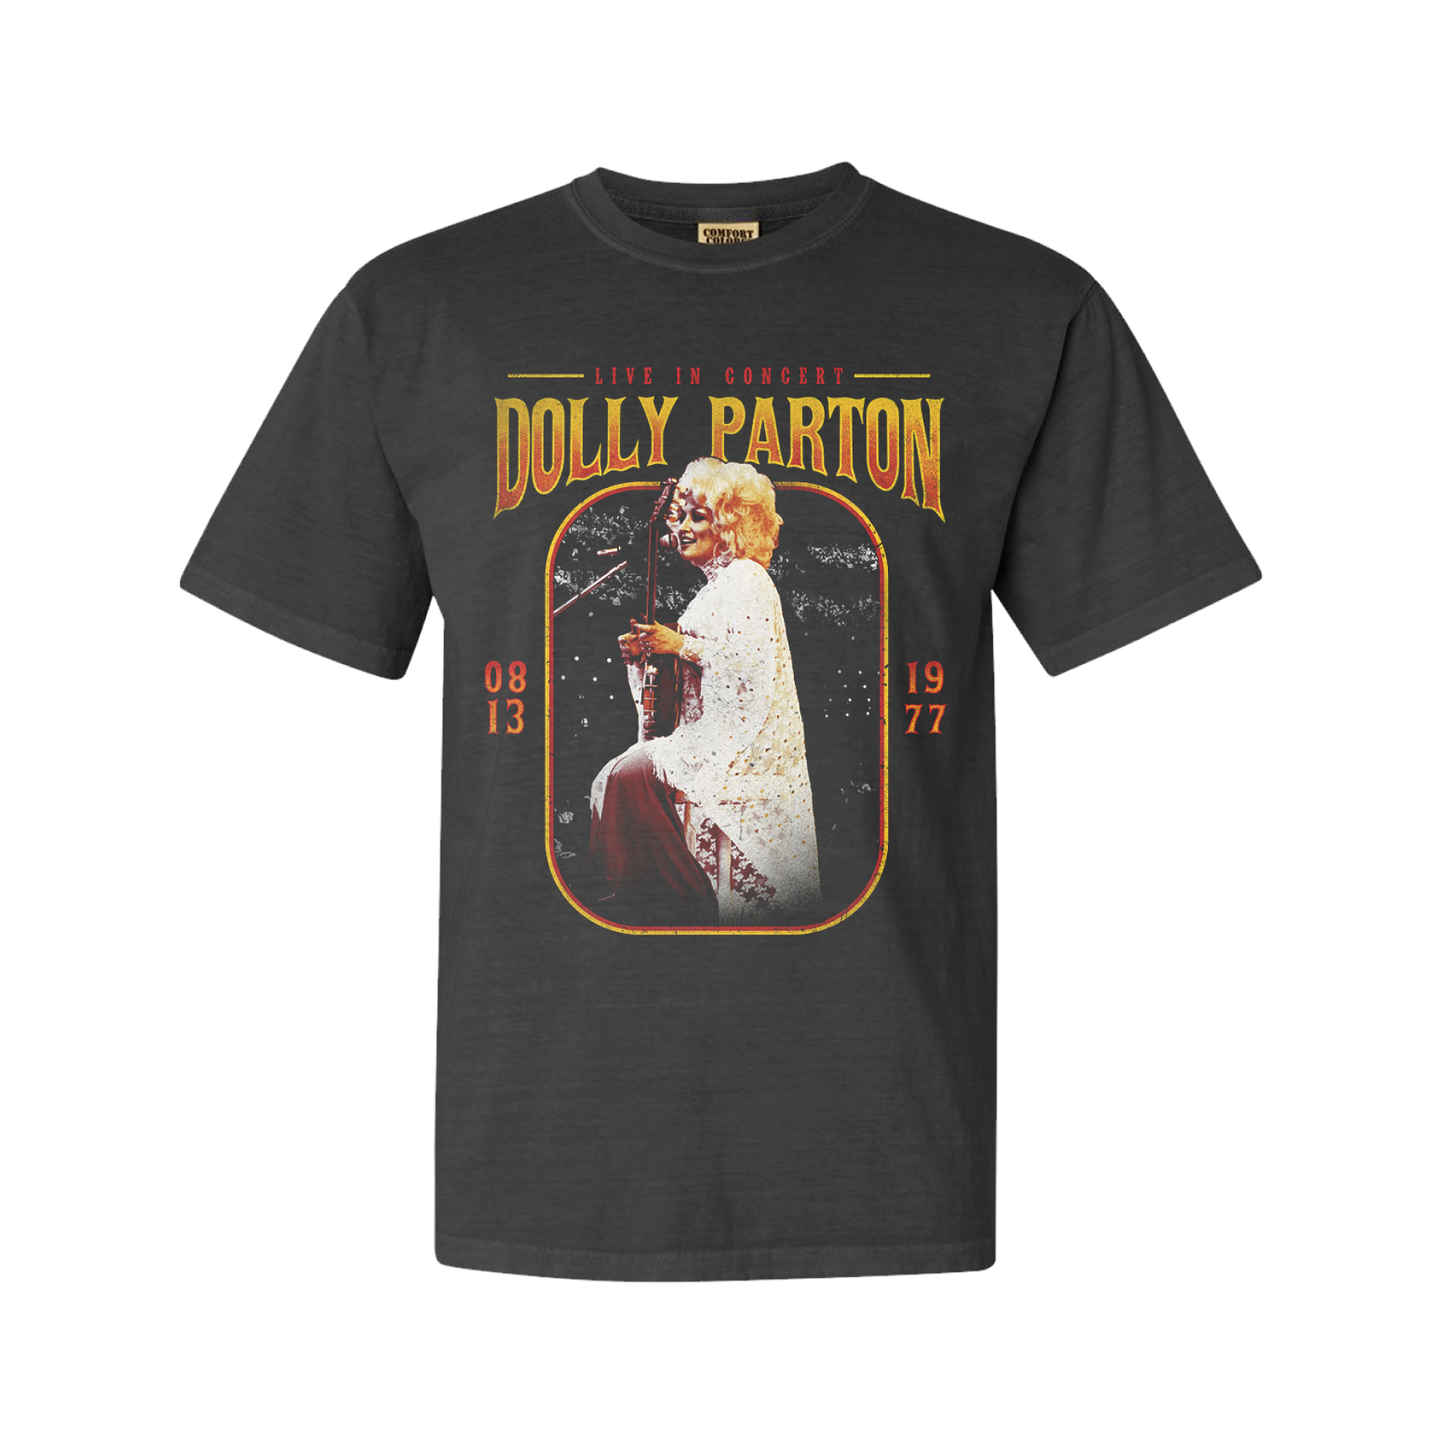 Official Dolly Parton Merchandise. Premium 100% grey cotton unisex t-shirt with a vintage 70's live photo of Dolly Parton playing guitar in white crocheted dress.